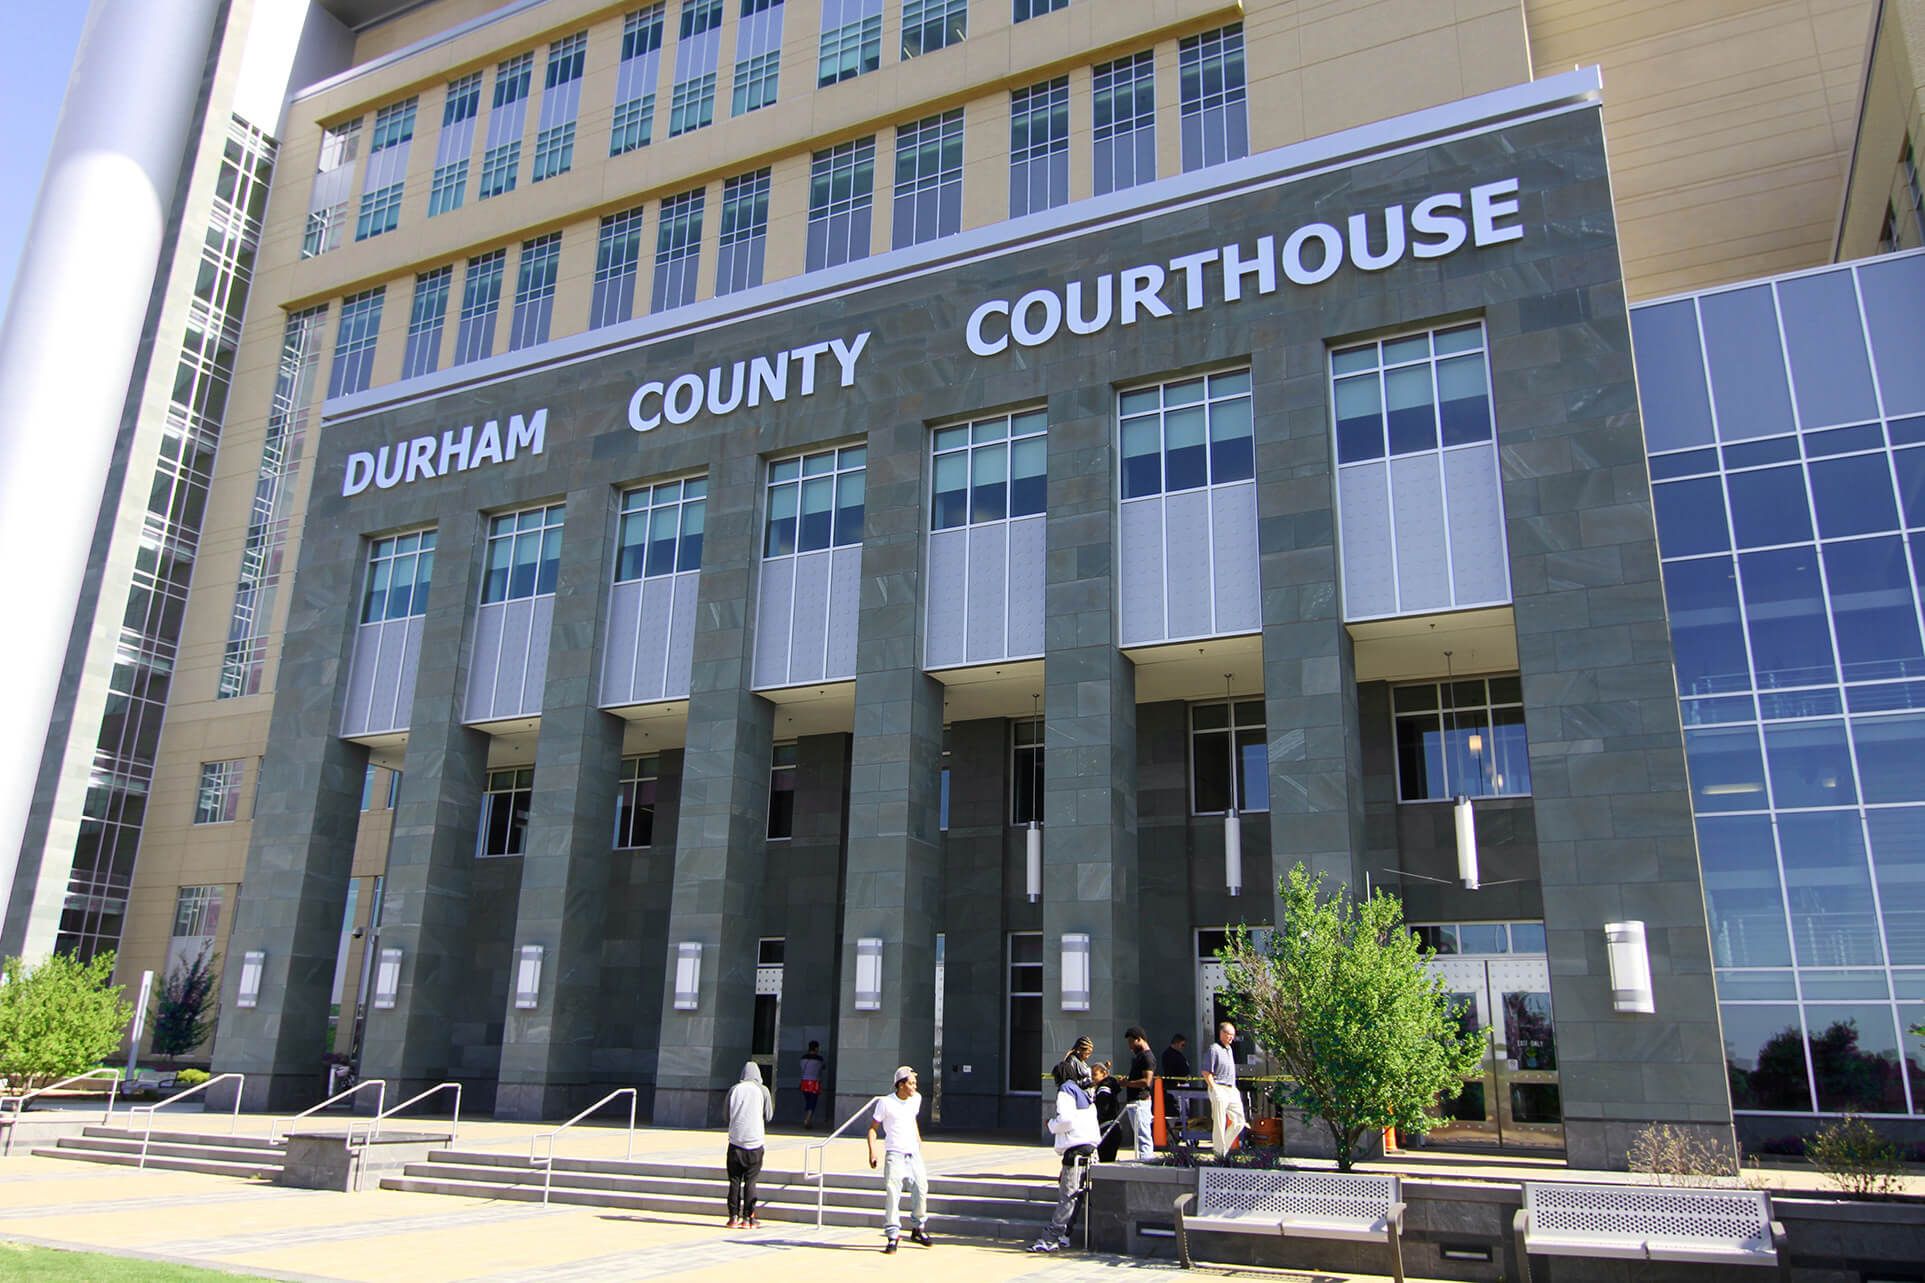 durham county courthouse exterior